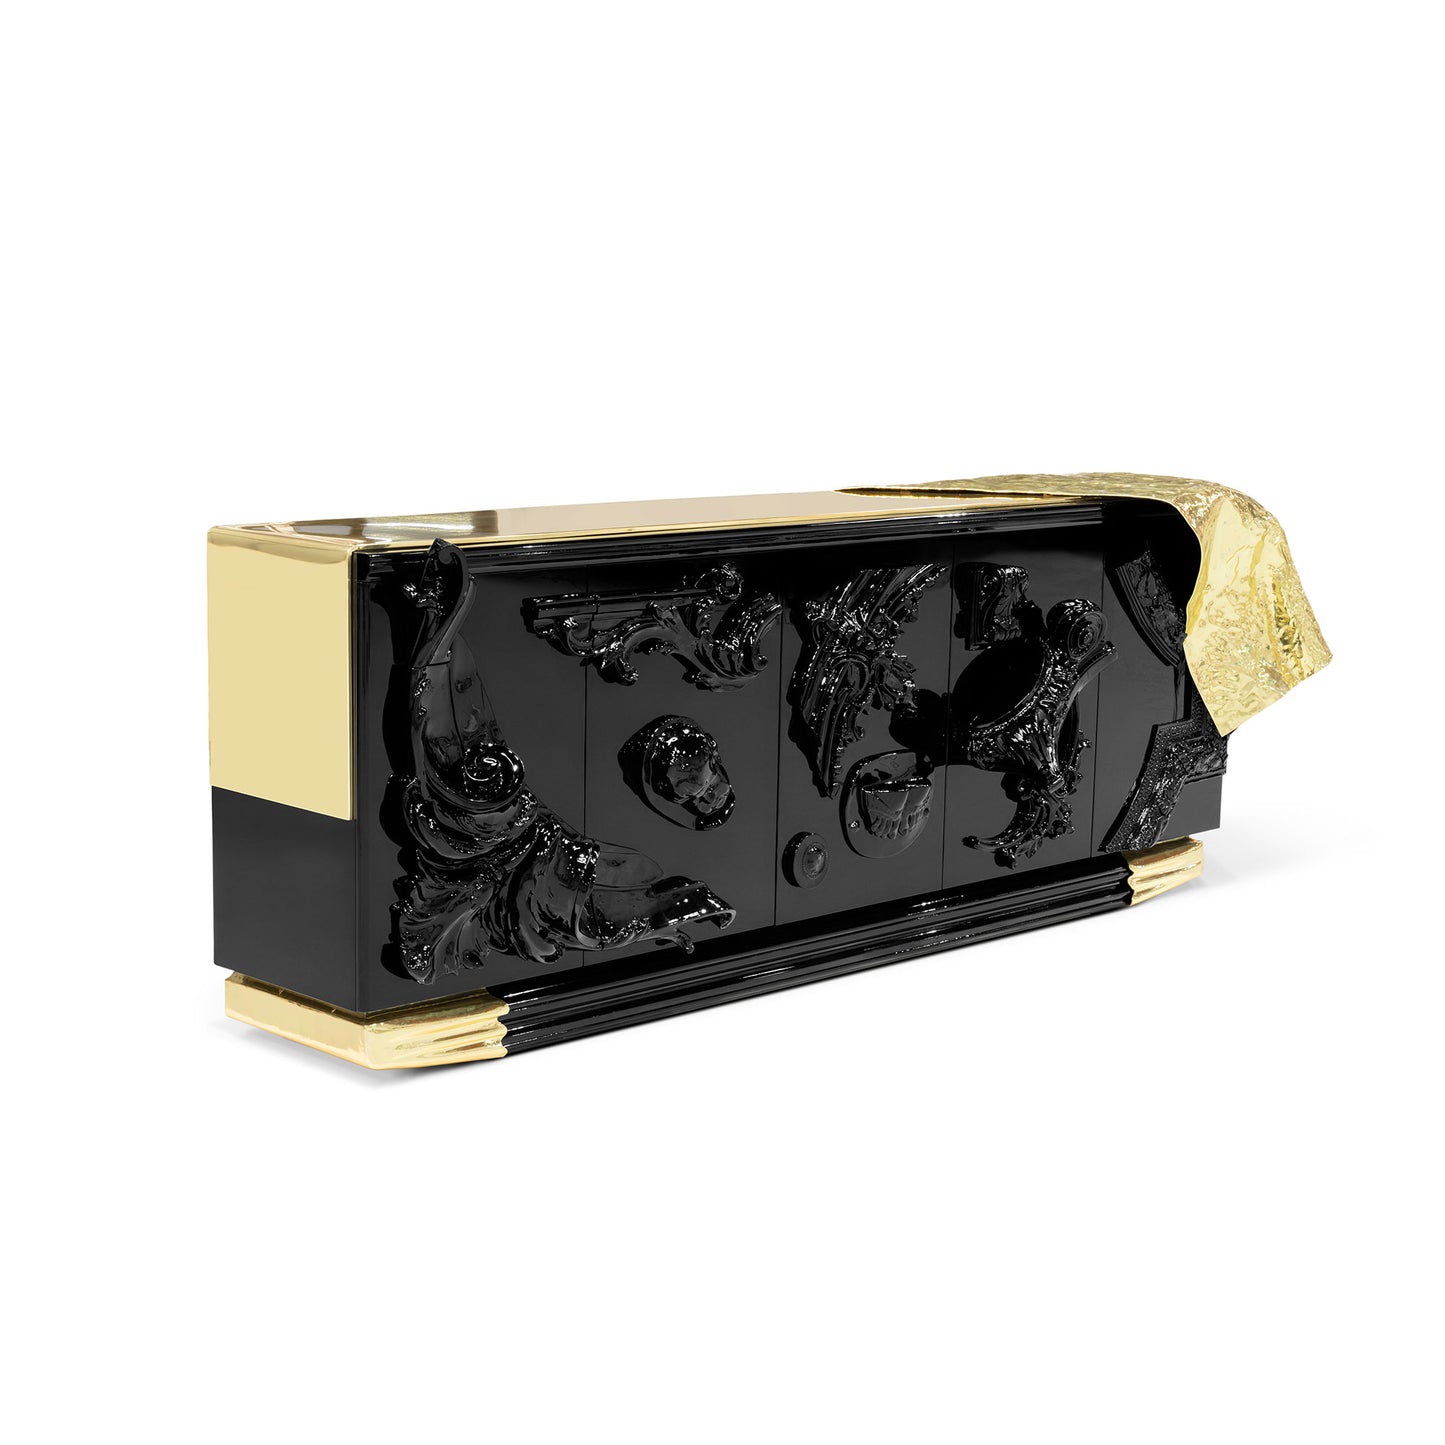 Black and Gold Voltaire Sideboard